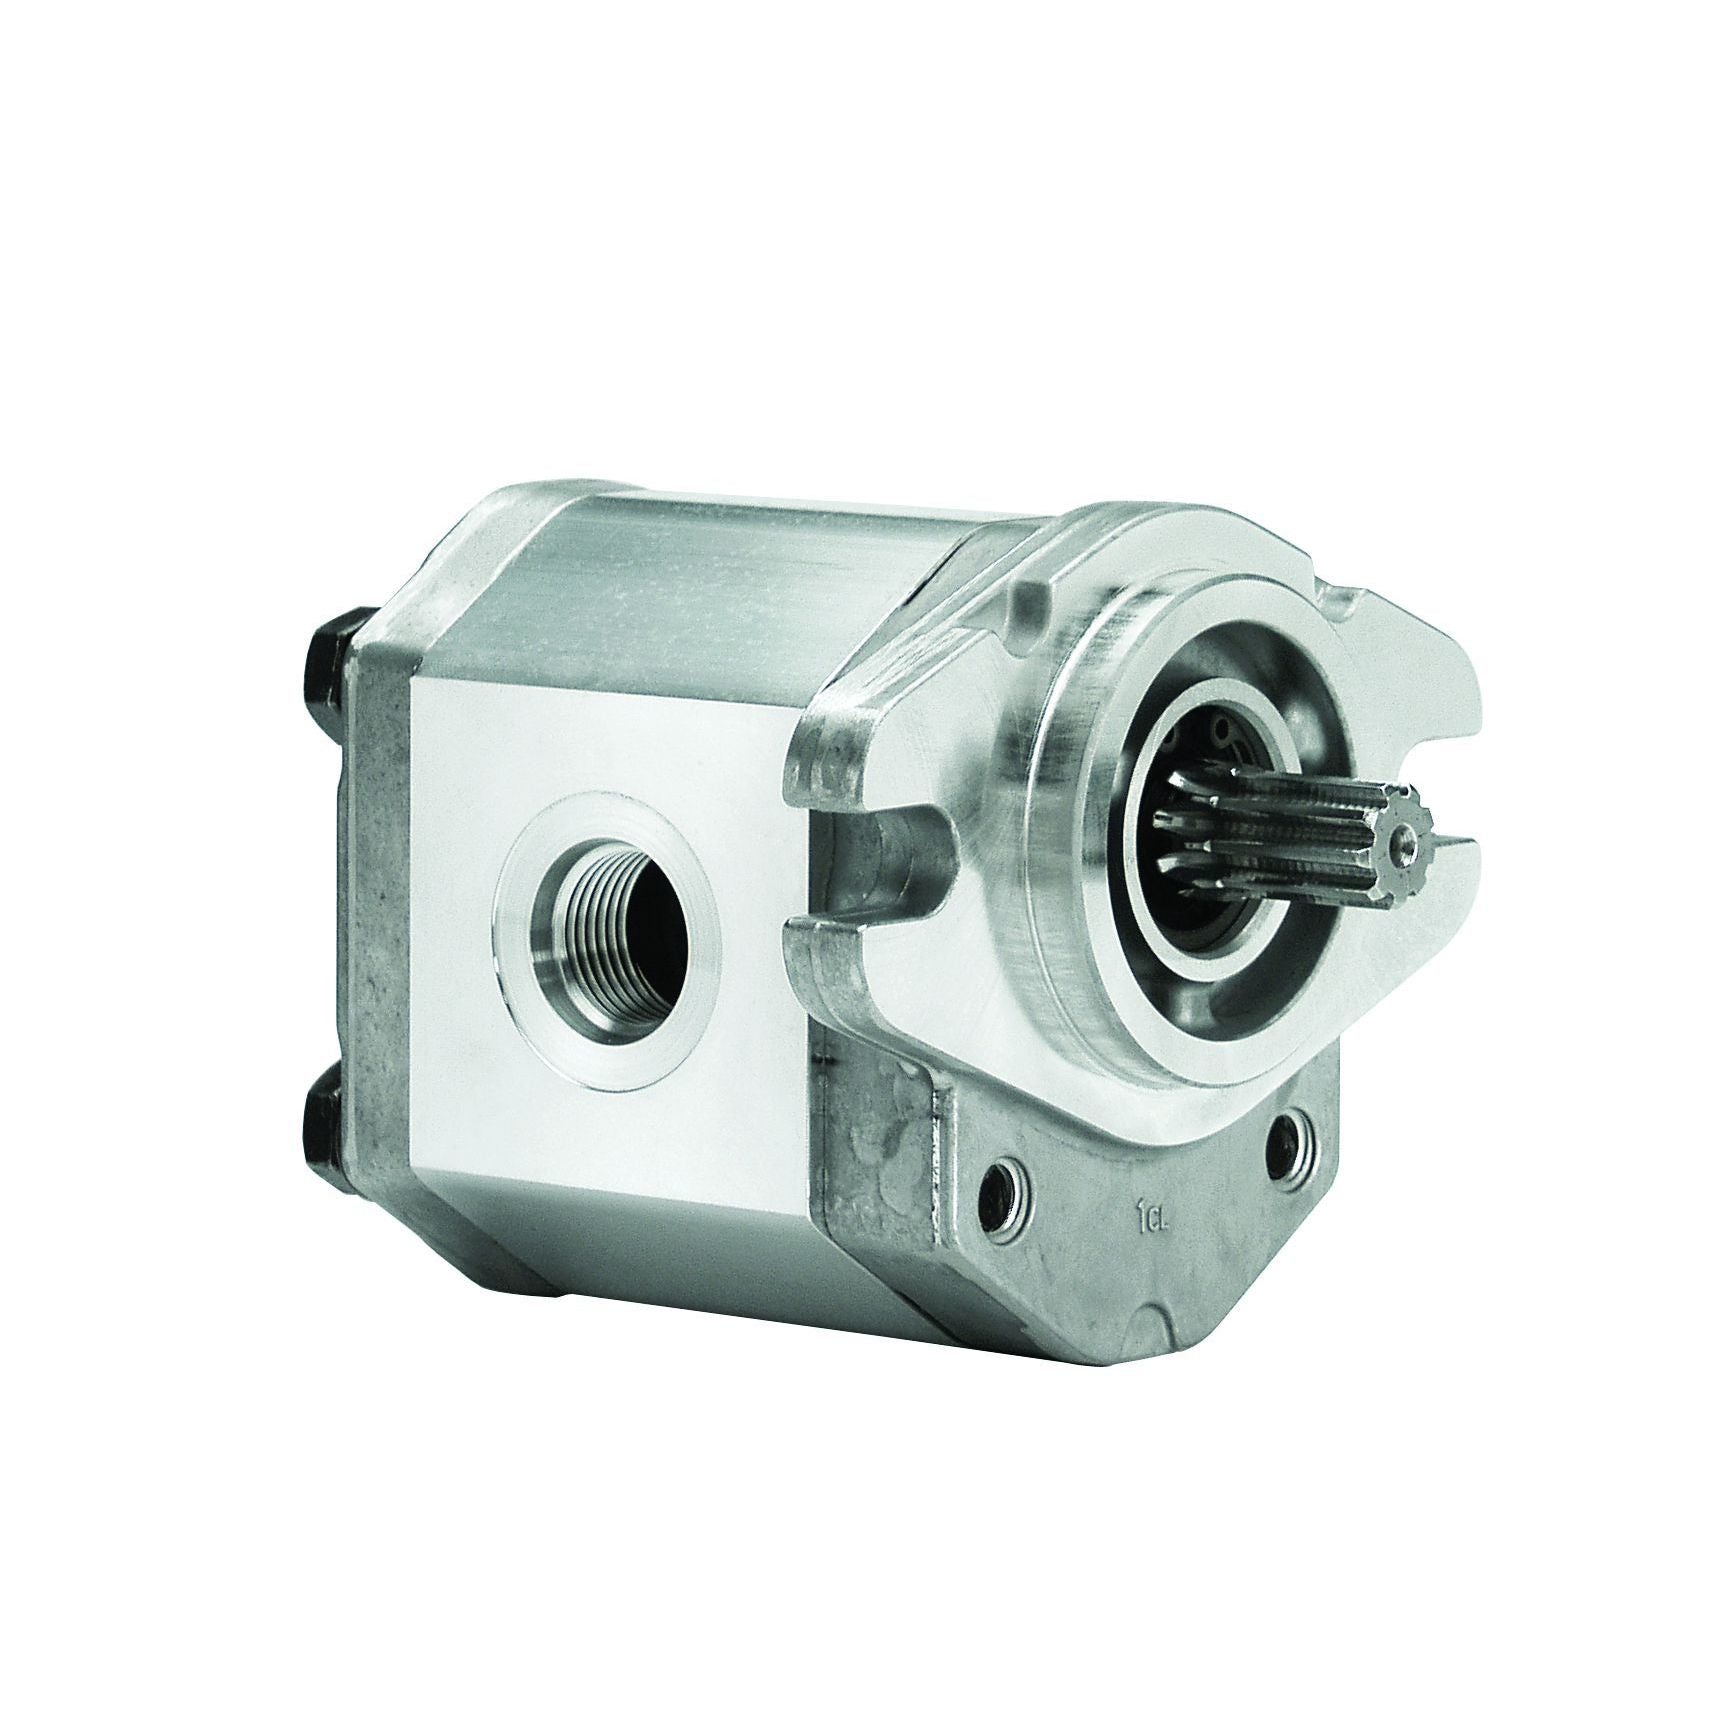 ALP1A-S-3-S1 : Marzocchi Gear Pump, CCW, 2.1cc (0.1281in3), 1 GPM, 3625psi, 6000 RPM, #8 SAE (1/2") In, #6 SAE (3/8") Out, Splined Shaft 9T 20/40DP, SAE AA 2-Bolt Mount